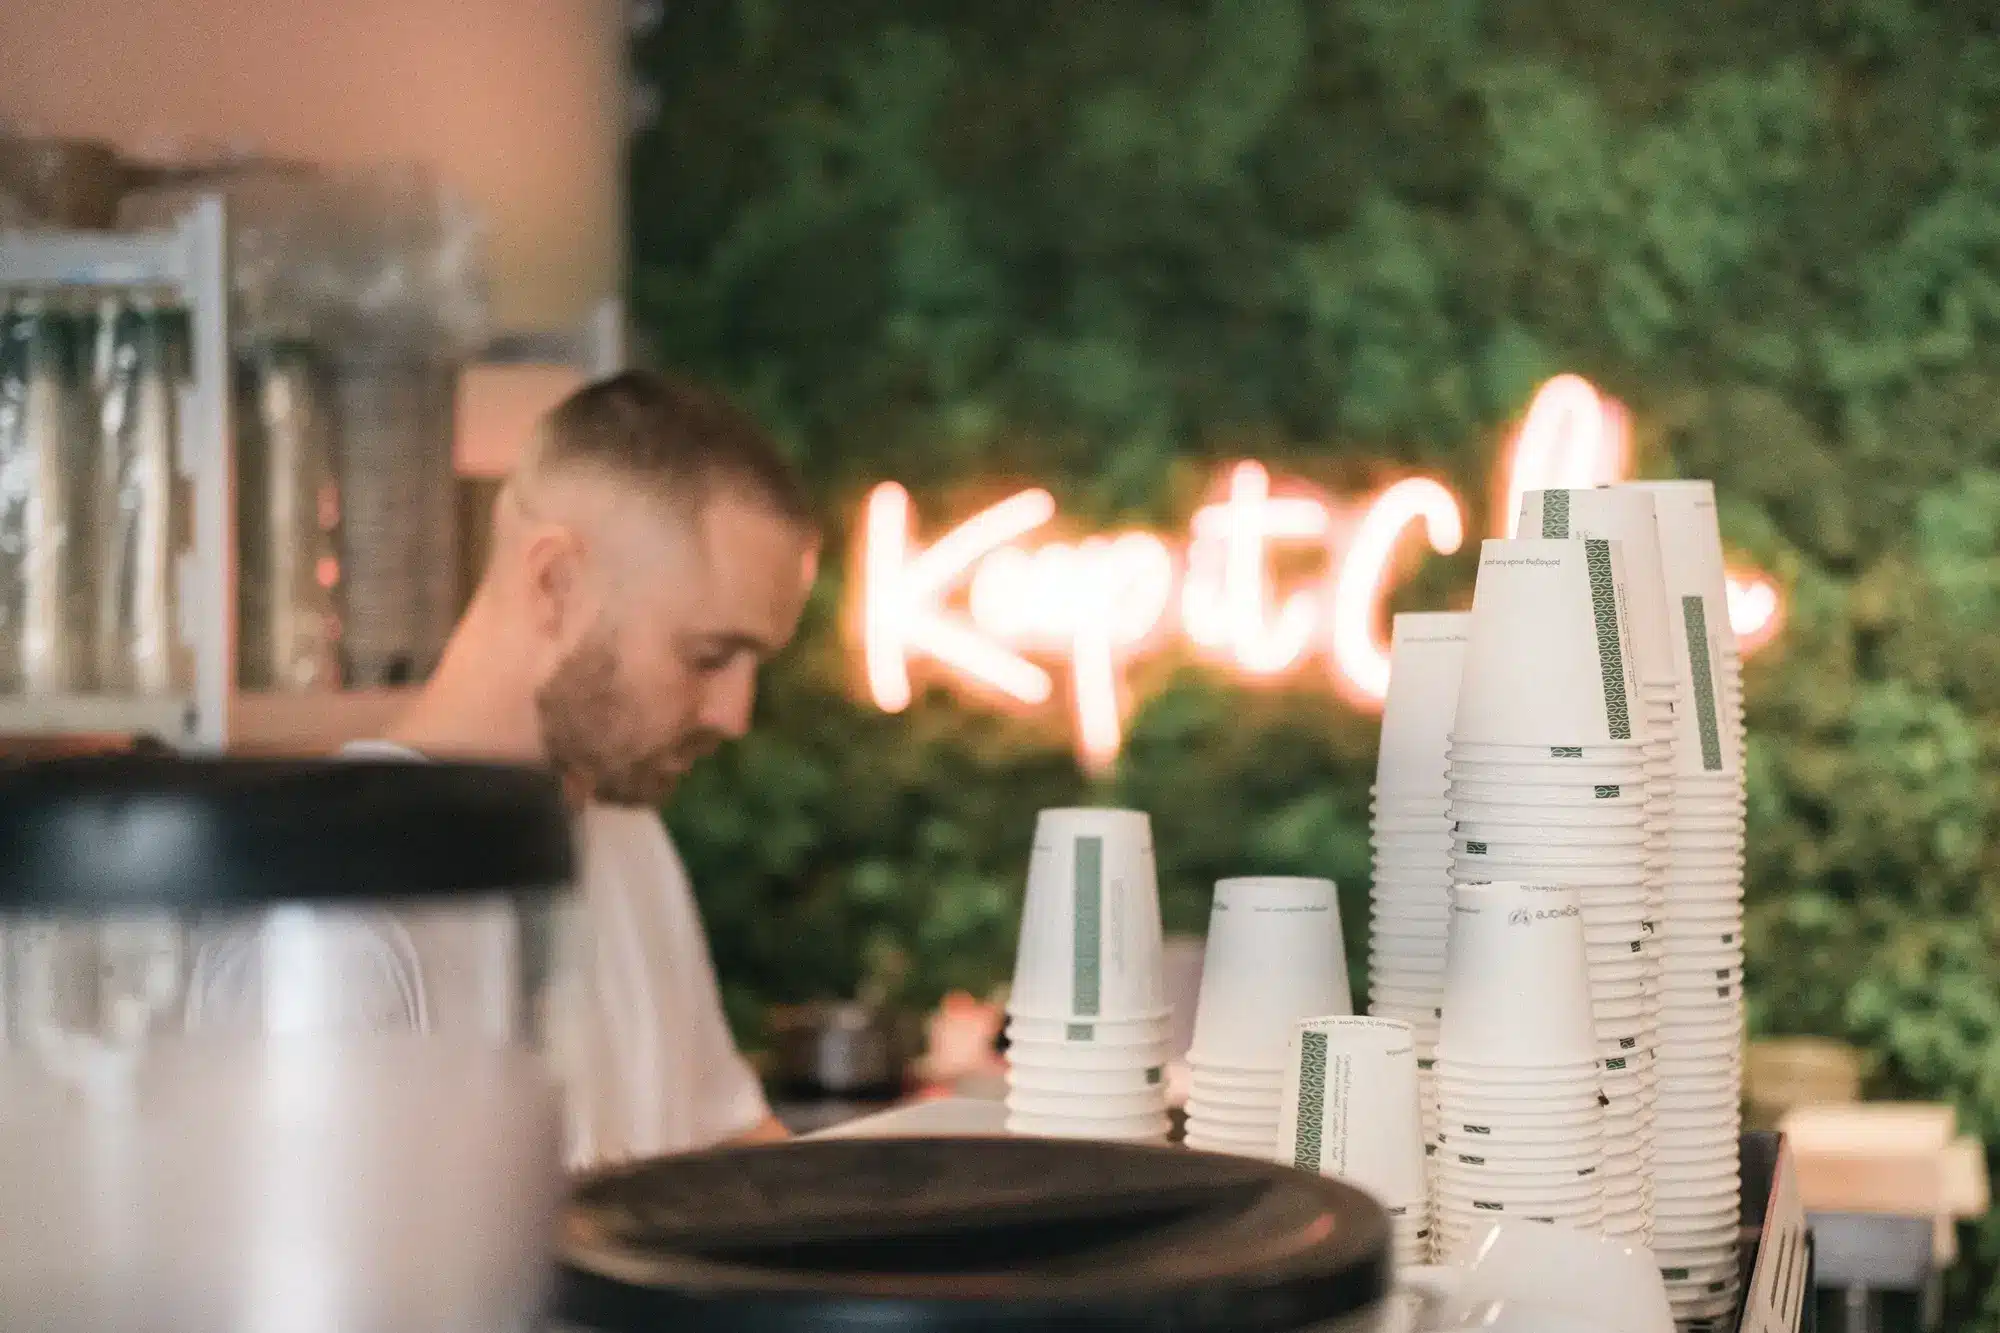 A display of paper cups inside a coffee shop.